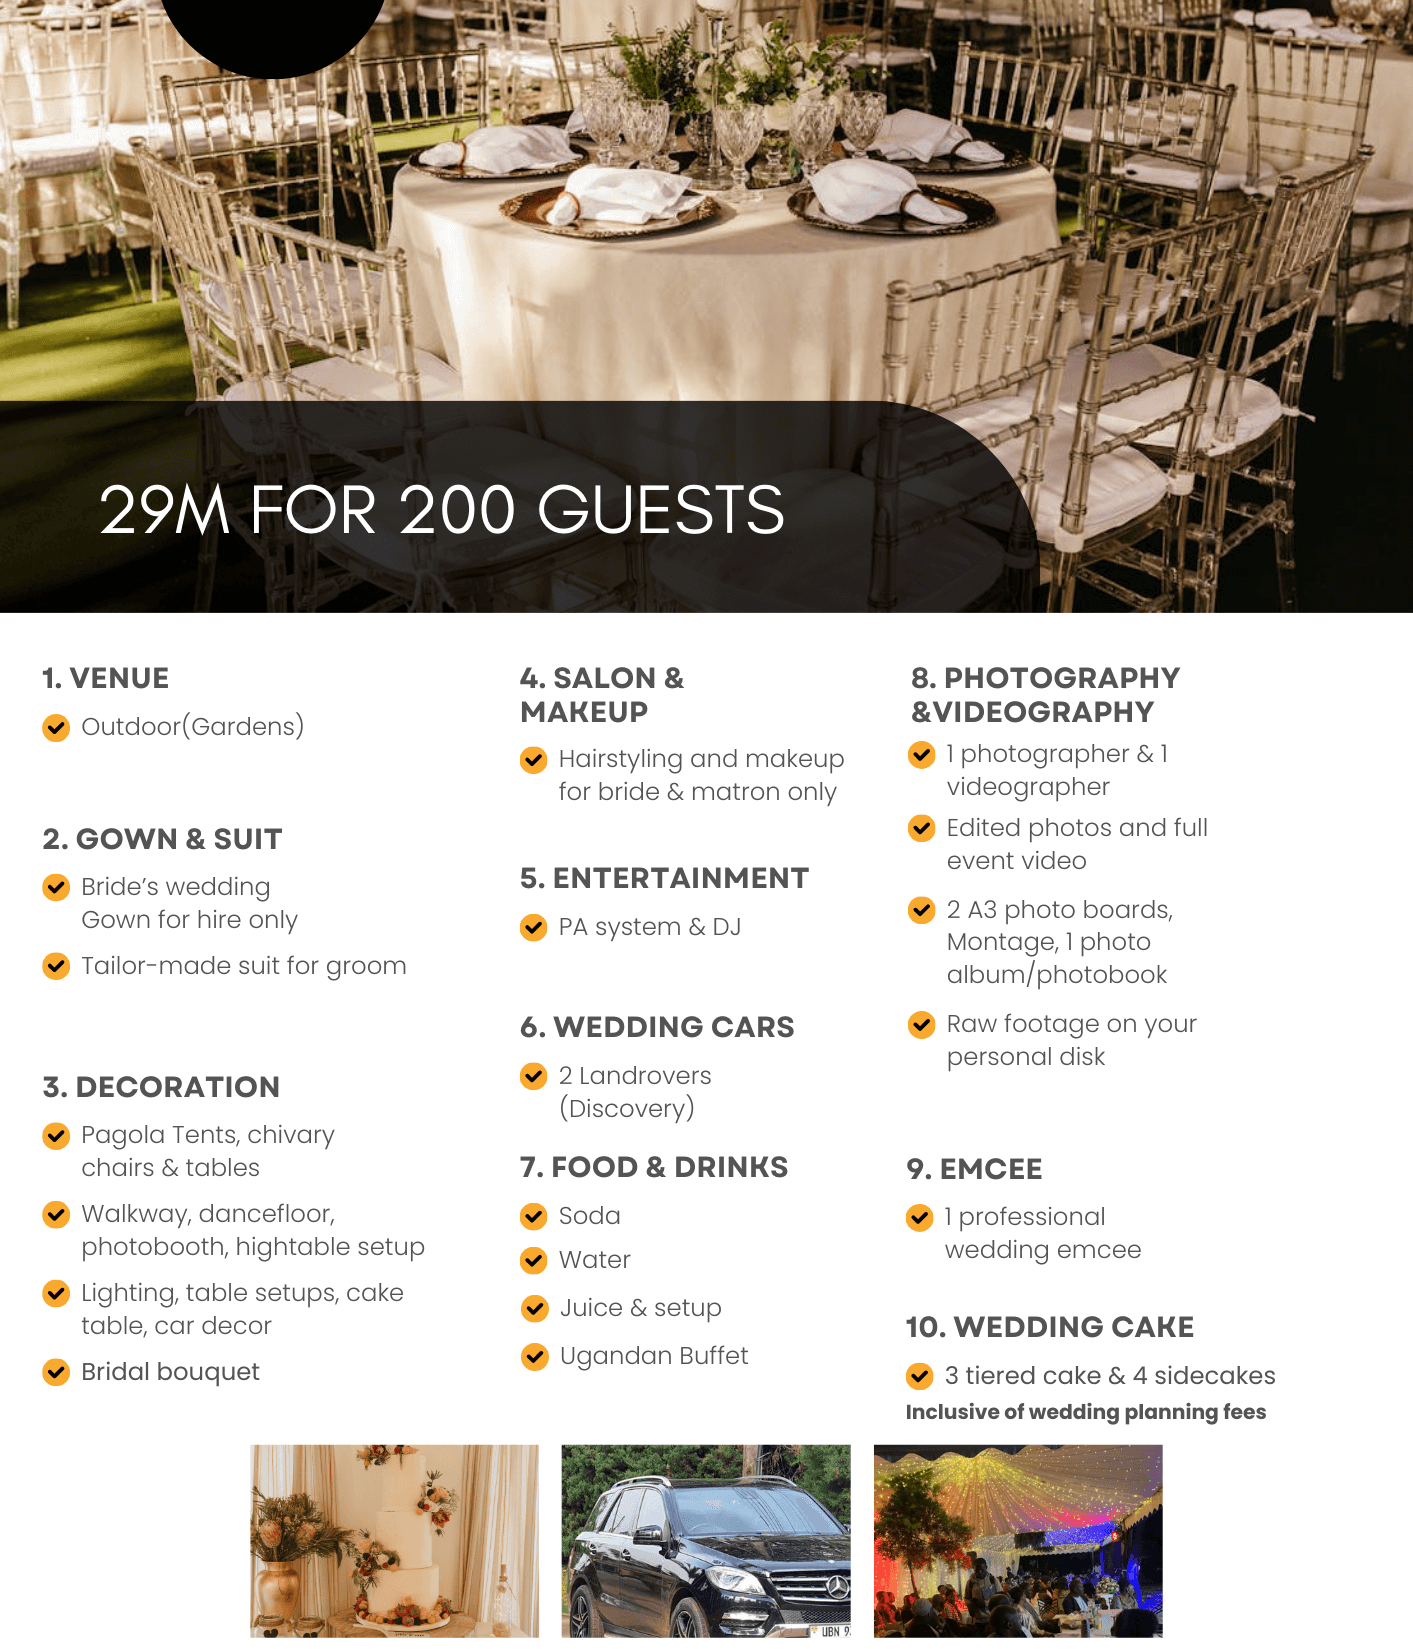 200 Guests wedding package at 29m ugx